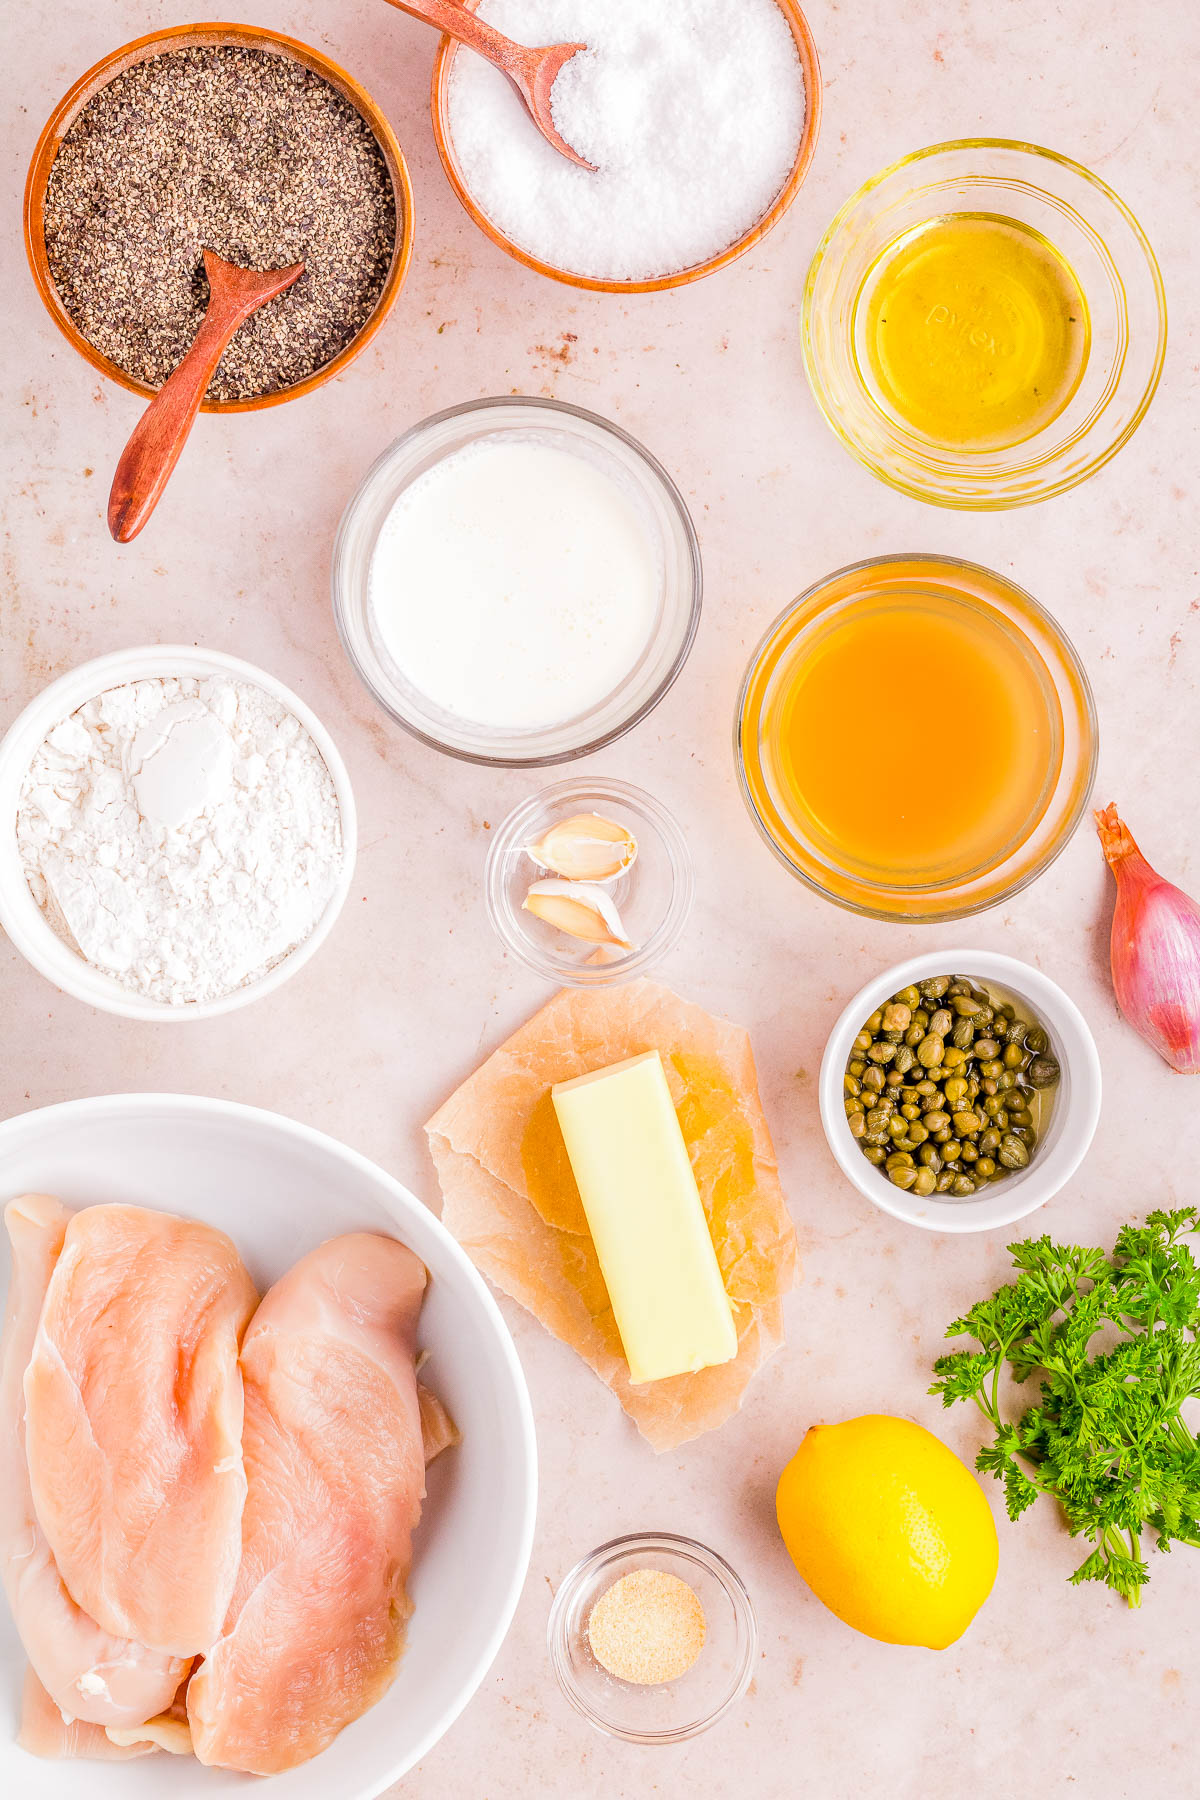 Ingredients for a chicken recipe displayed on a countertop, including raw chicken breasts, lemon, parsley, and various seasonings and oils.